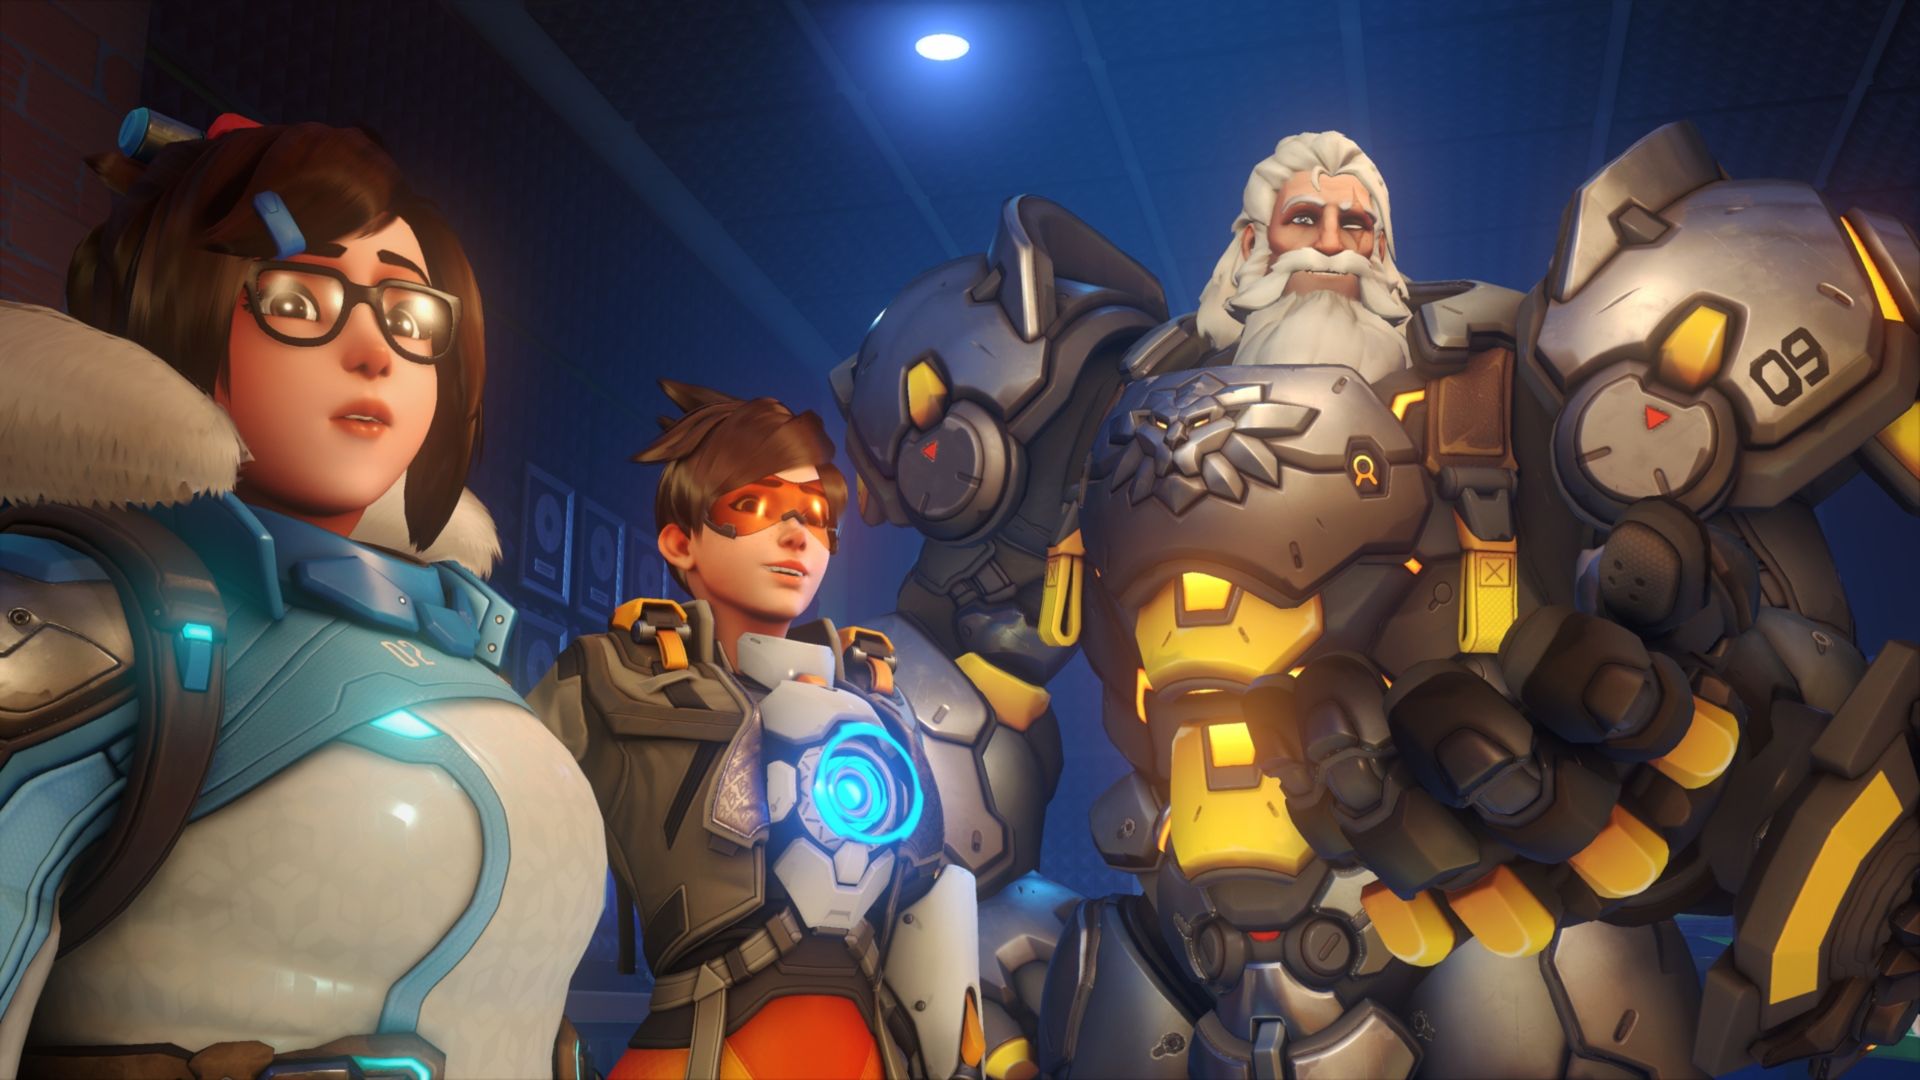 Today, we are covering how to get an Overwatch 2 Beta key, as well as answering the questions: "How do I redeem the Overwatch 2 beta?" and "Is the Overwatch 2 beta free?"